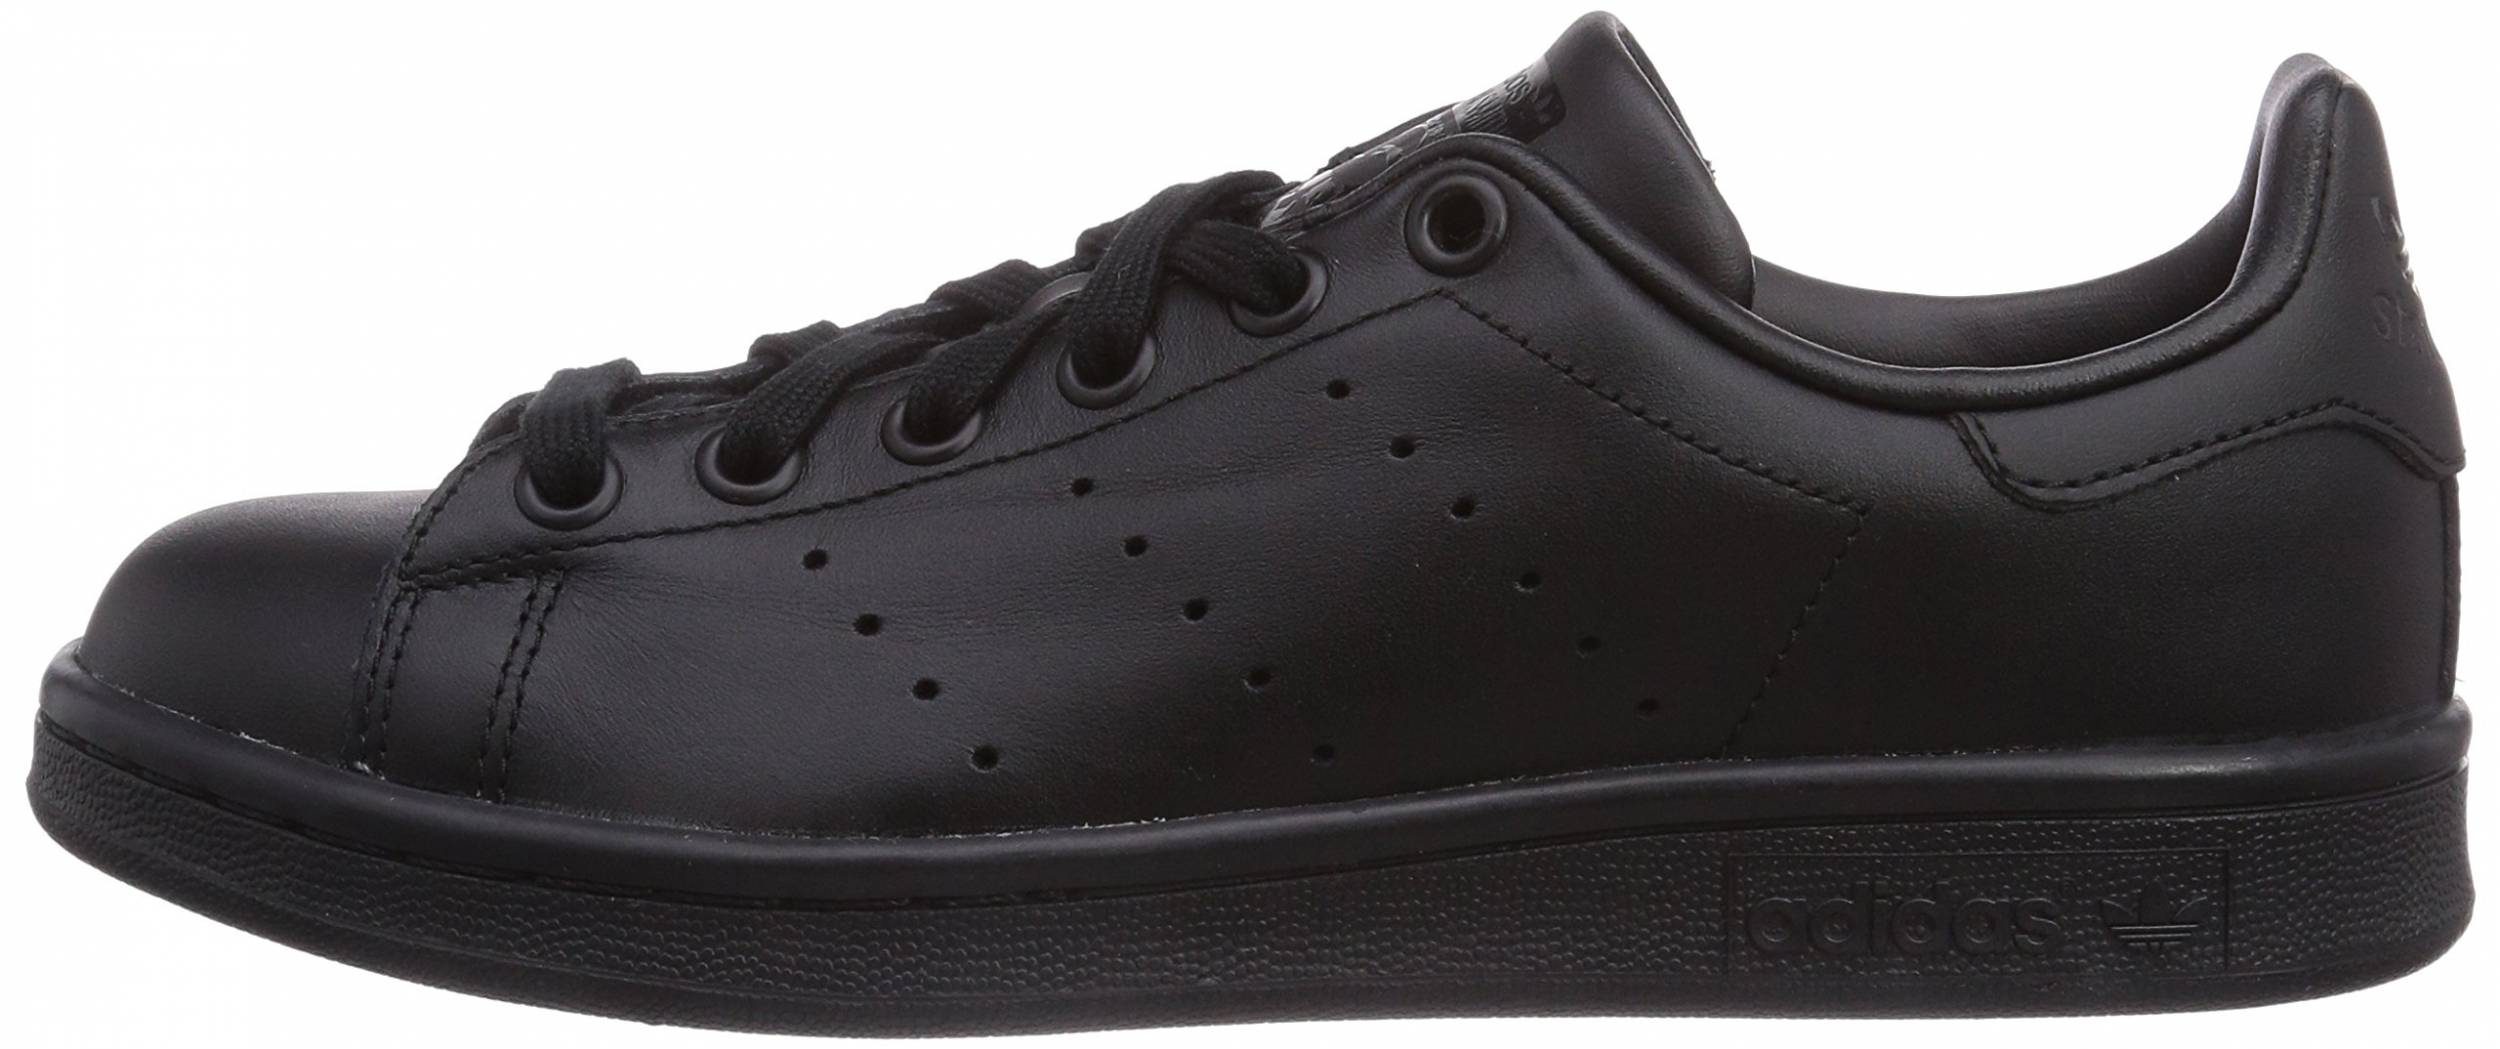 adidas stan smith real leather, OFF 75 